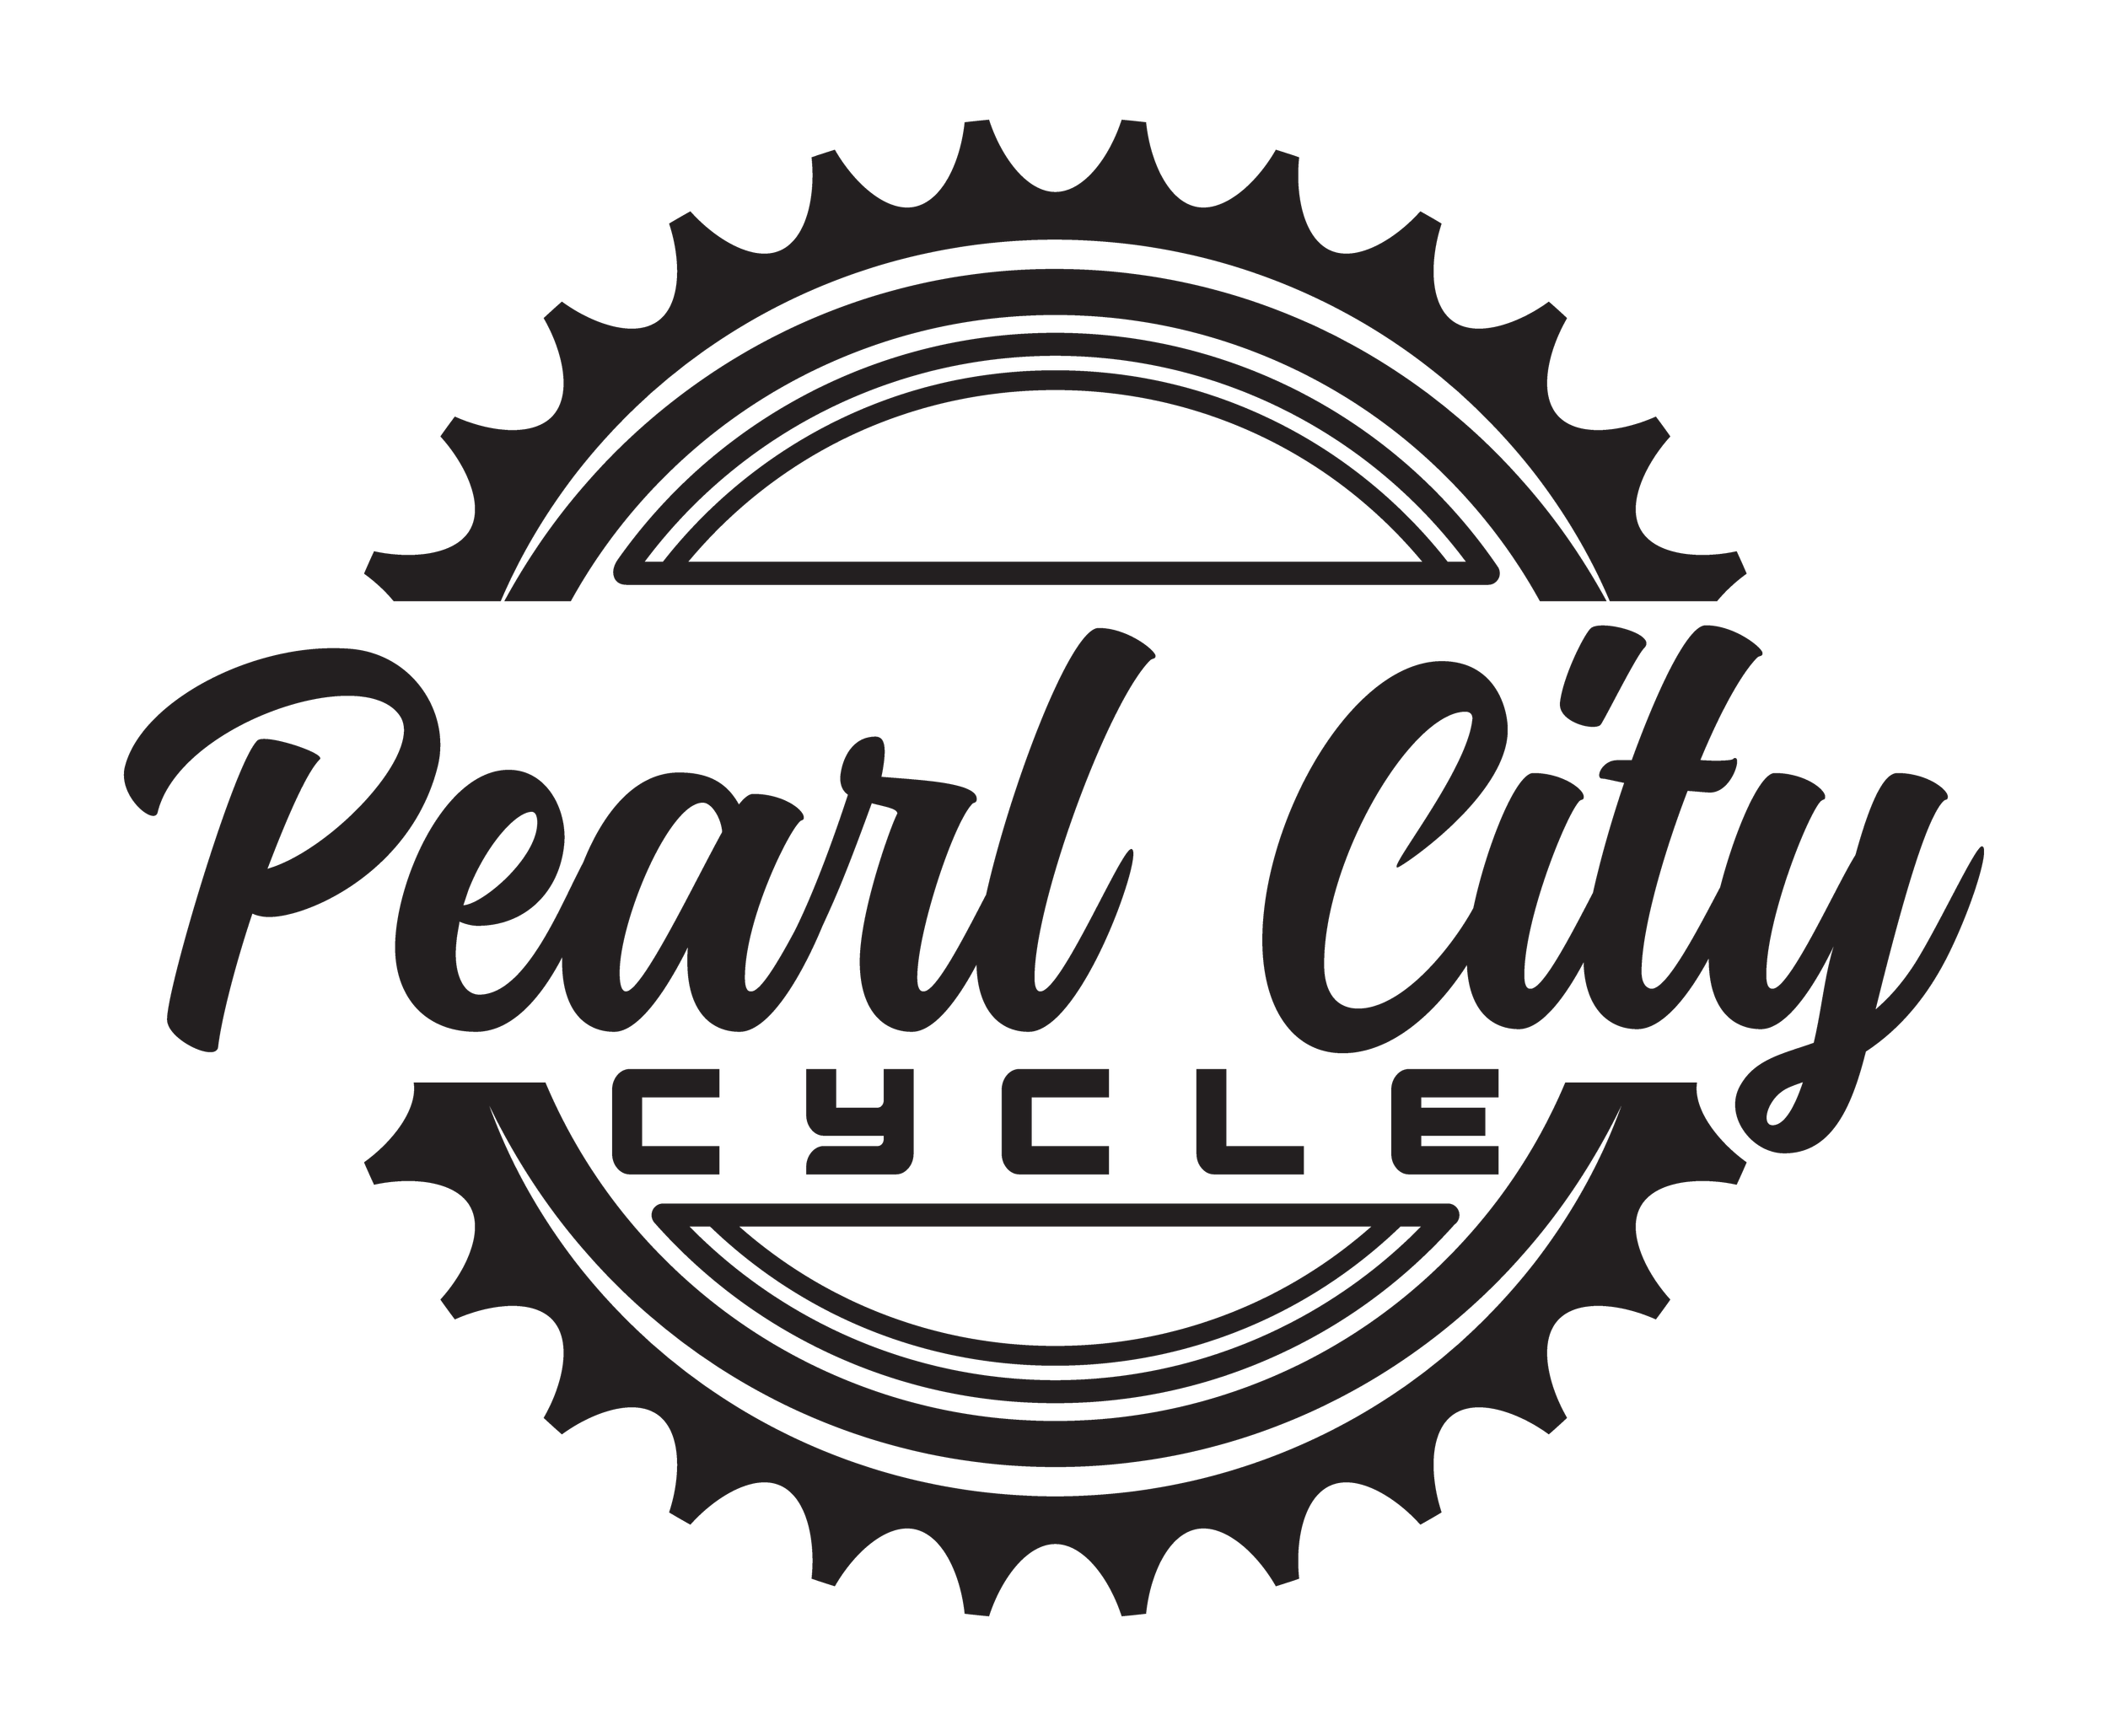 Pearl City Cycle.png